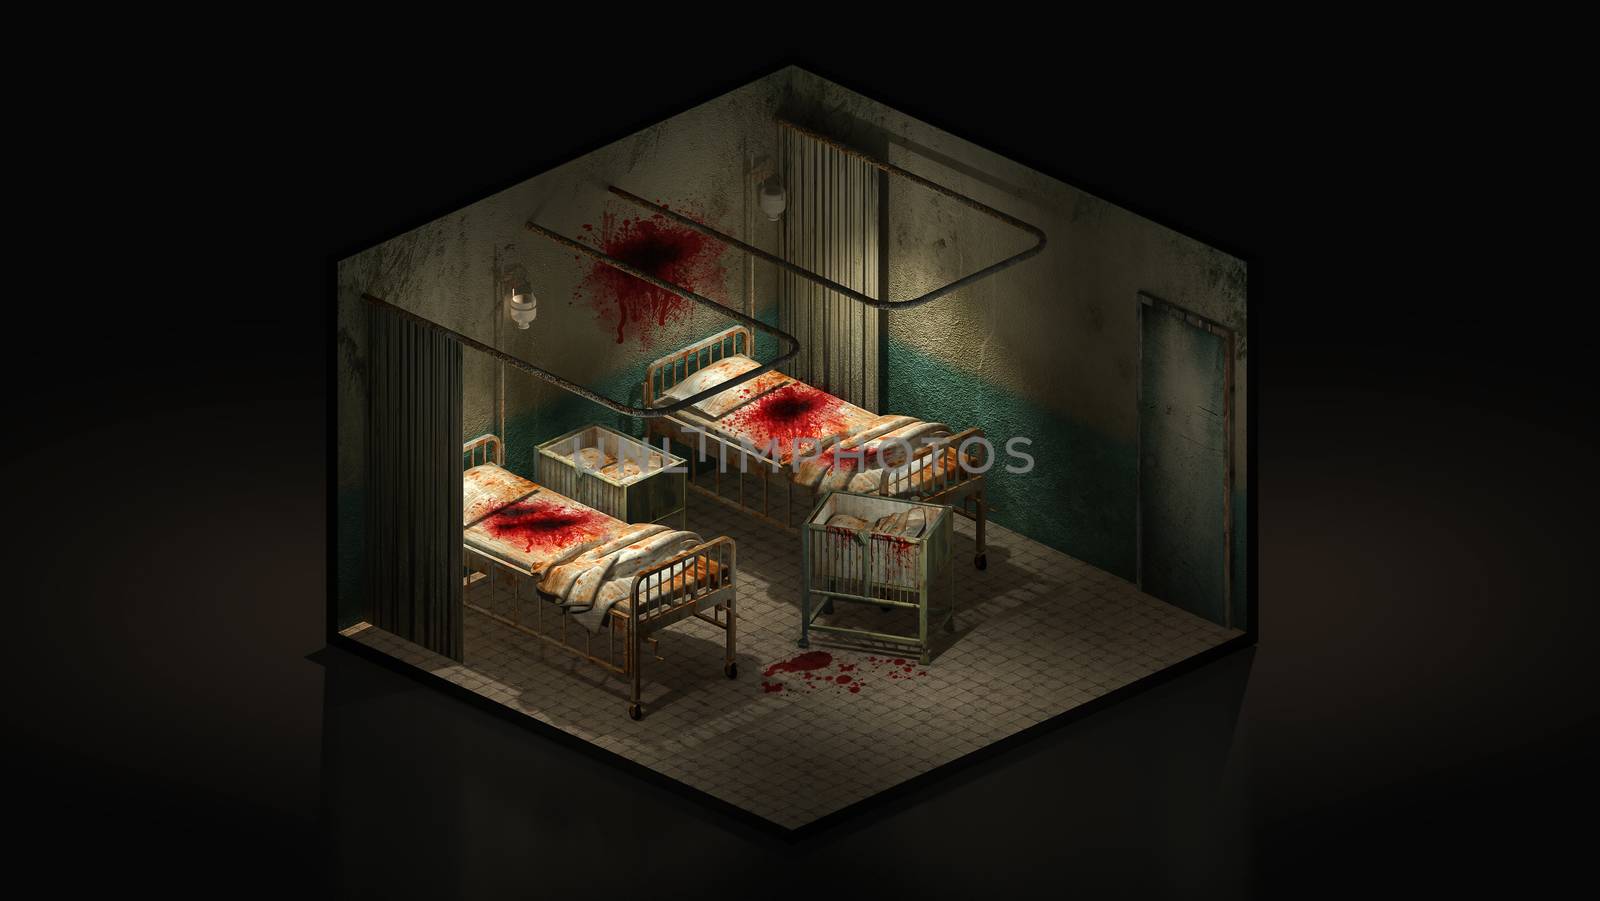 Horror and creepy ward room in the hospital with blood. 3d illustration Isomatric.